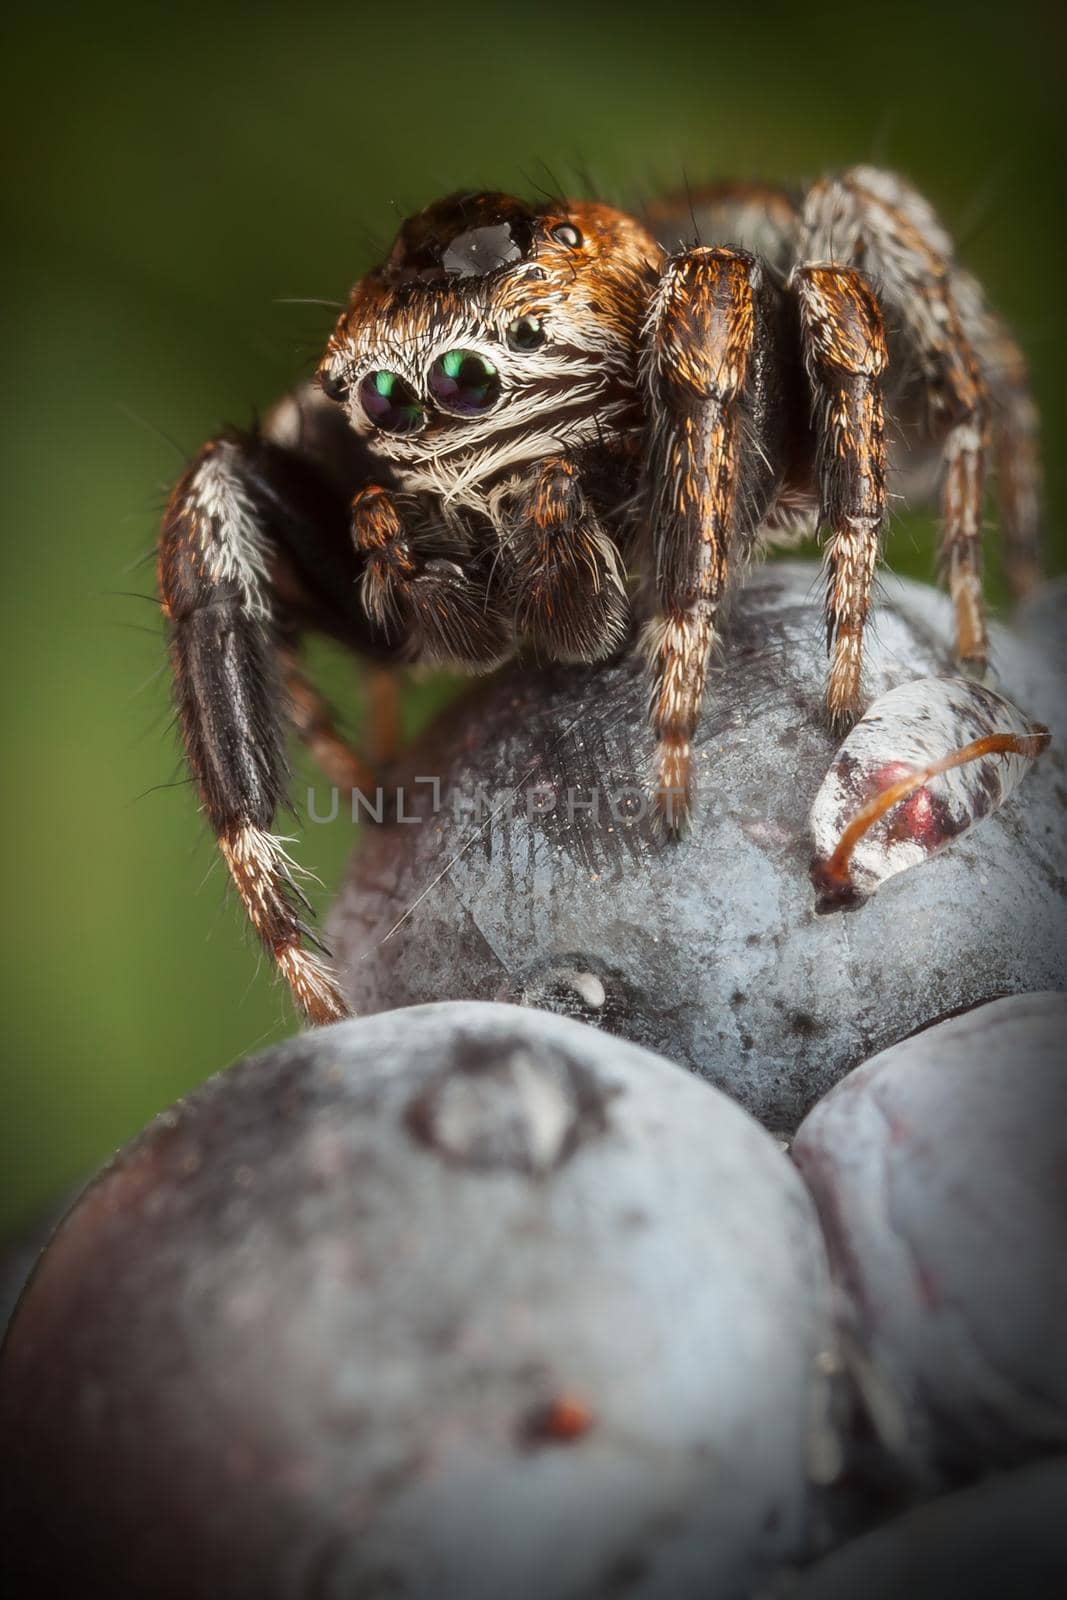 Jumping spider on the Blackberry with a large drop of water on his head